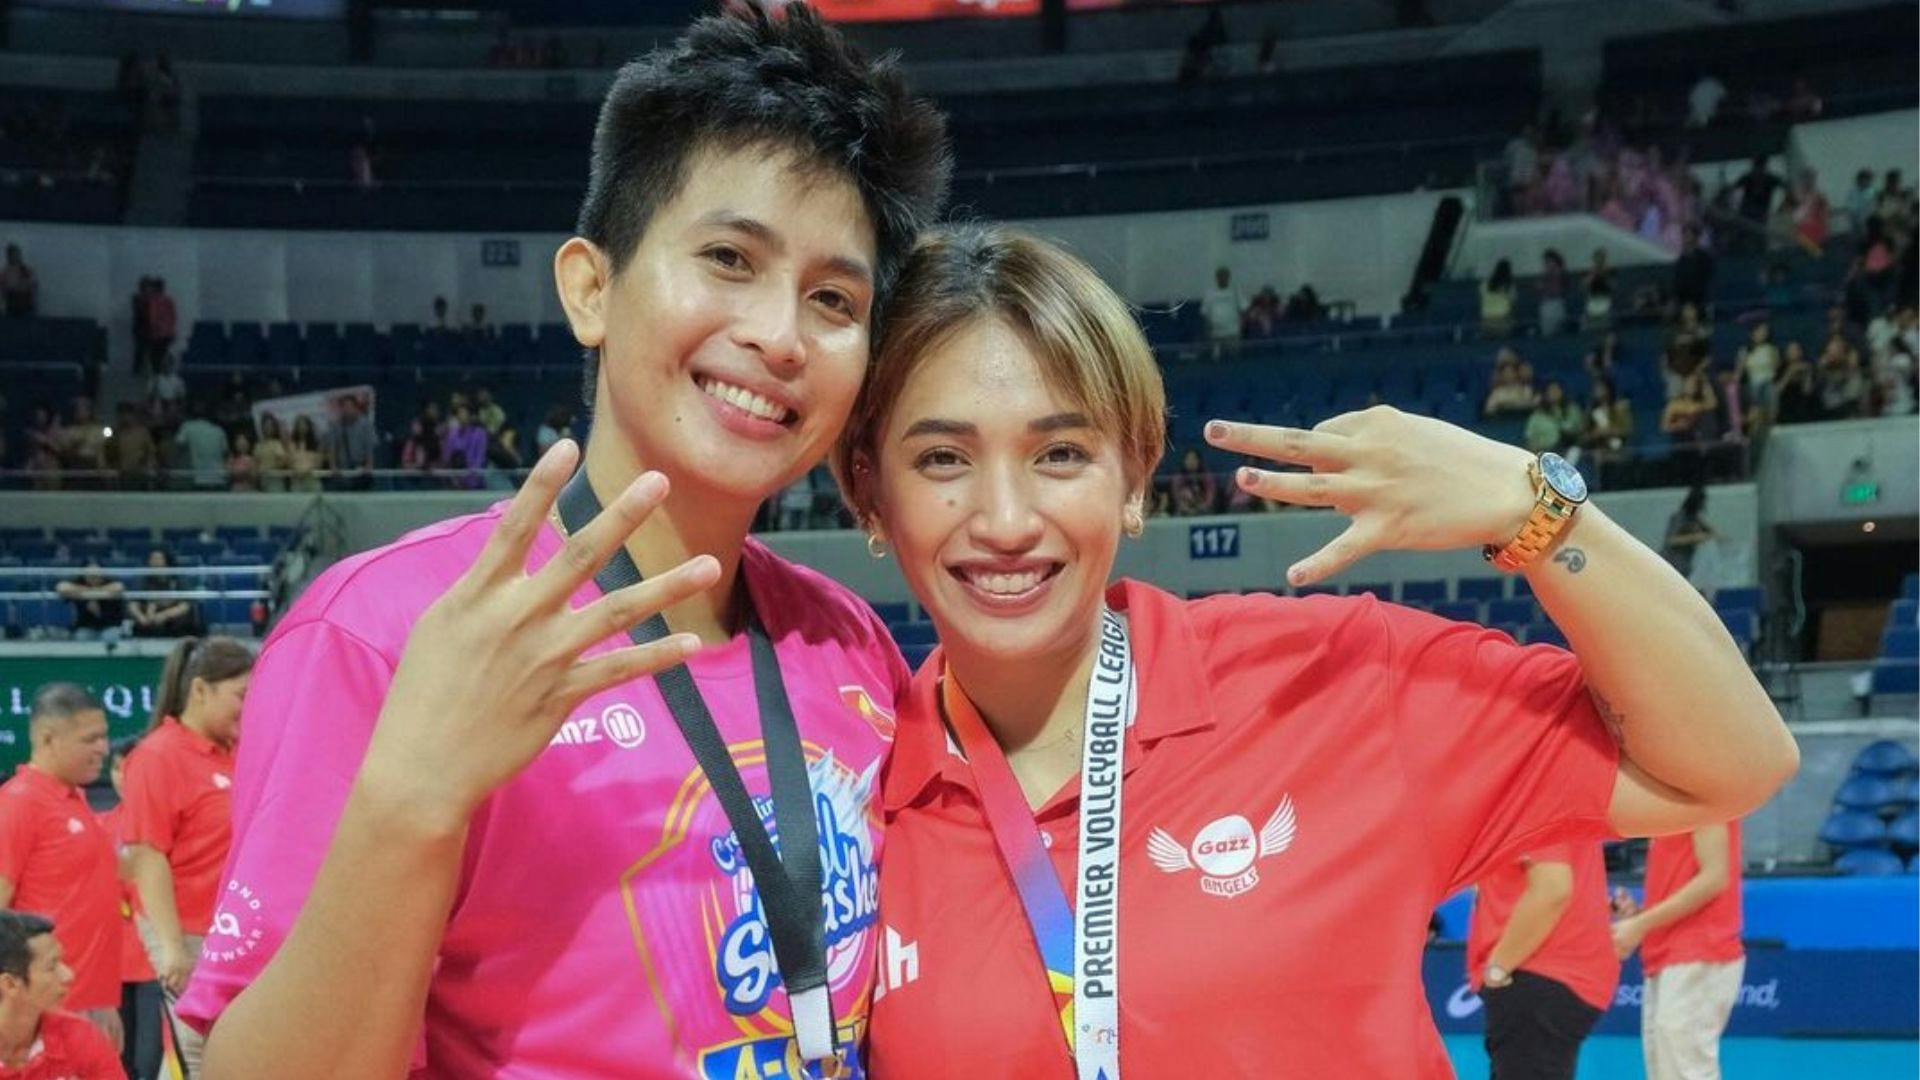 Couple Goals: Creamline’s Pangs Panaga and Petro Gazz’ Michelle Morente set the bar higher in love and volleyball